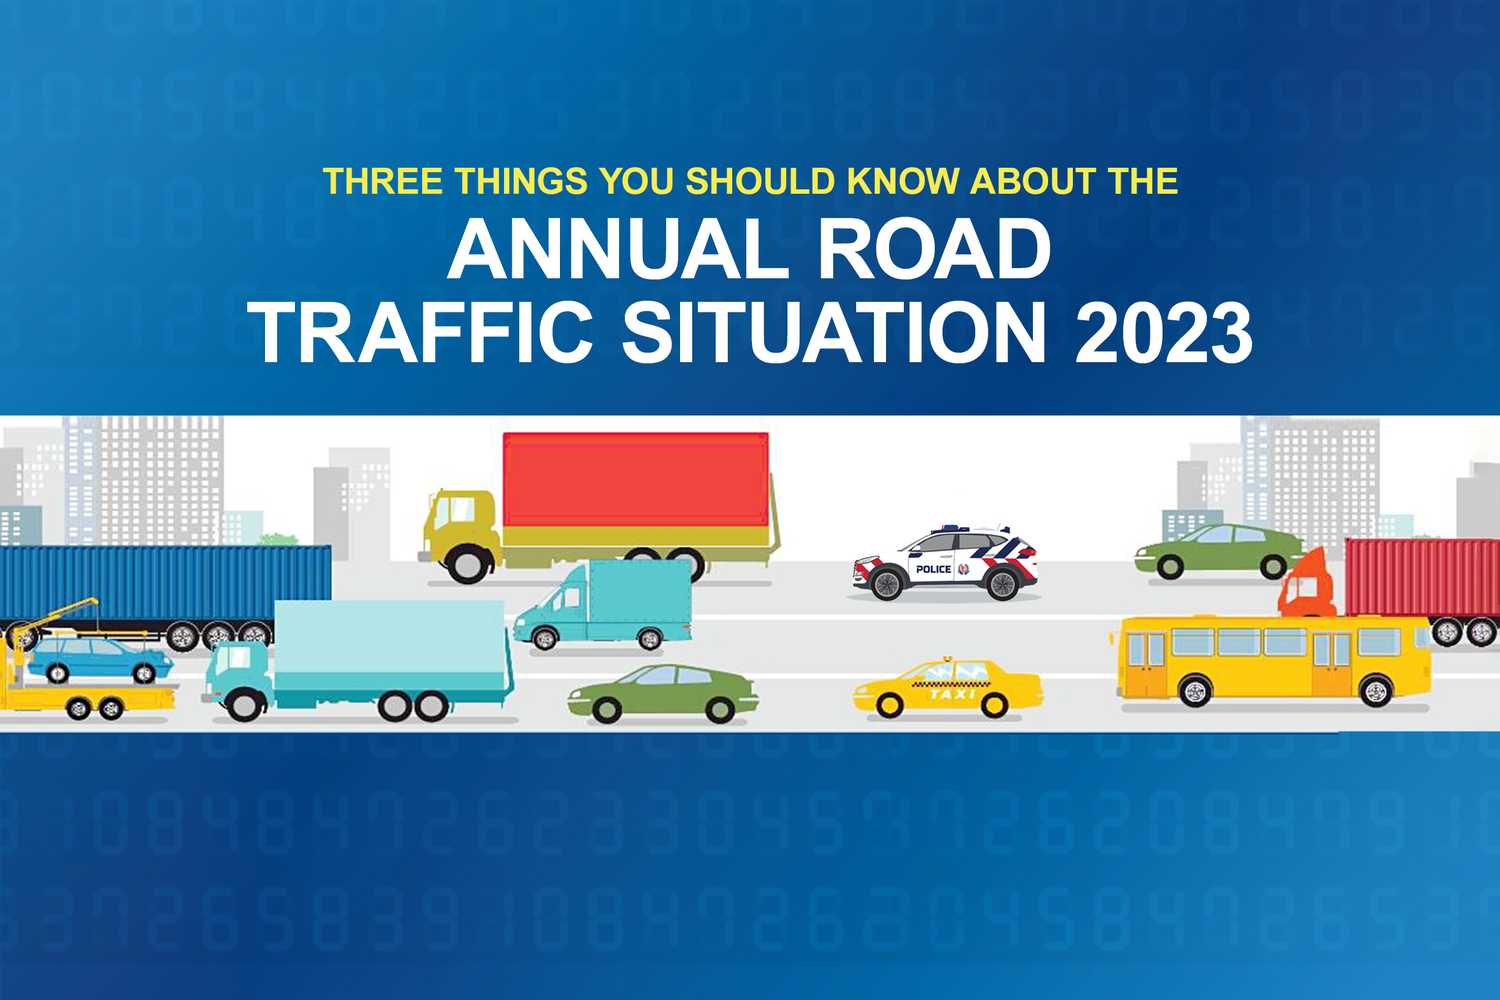 Police Life 042024 Three Things You Should Know About the Annual Road Traffic Situation 2023 01